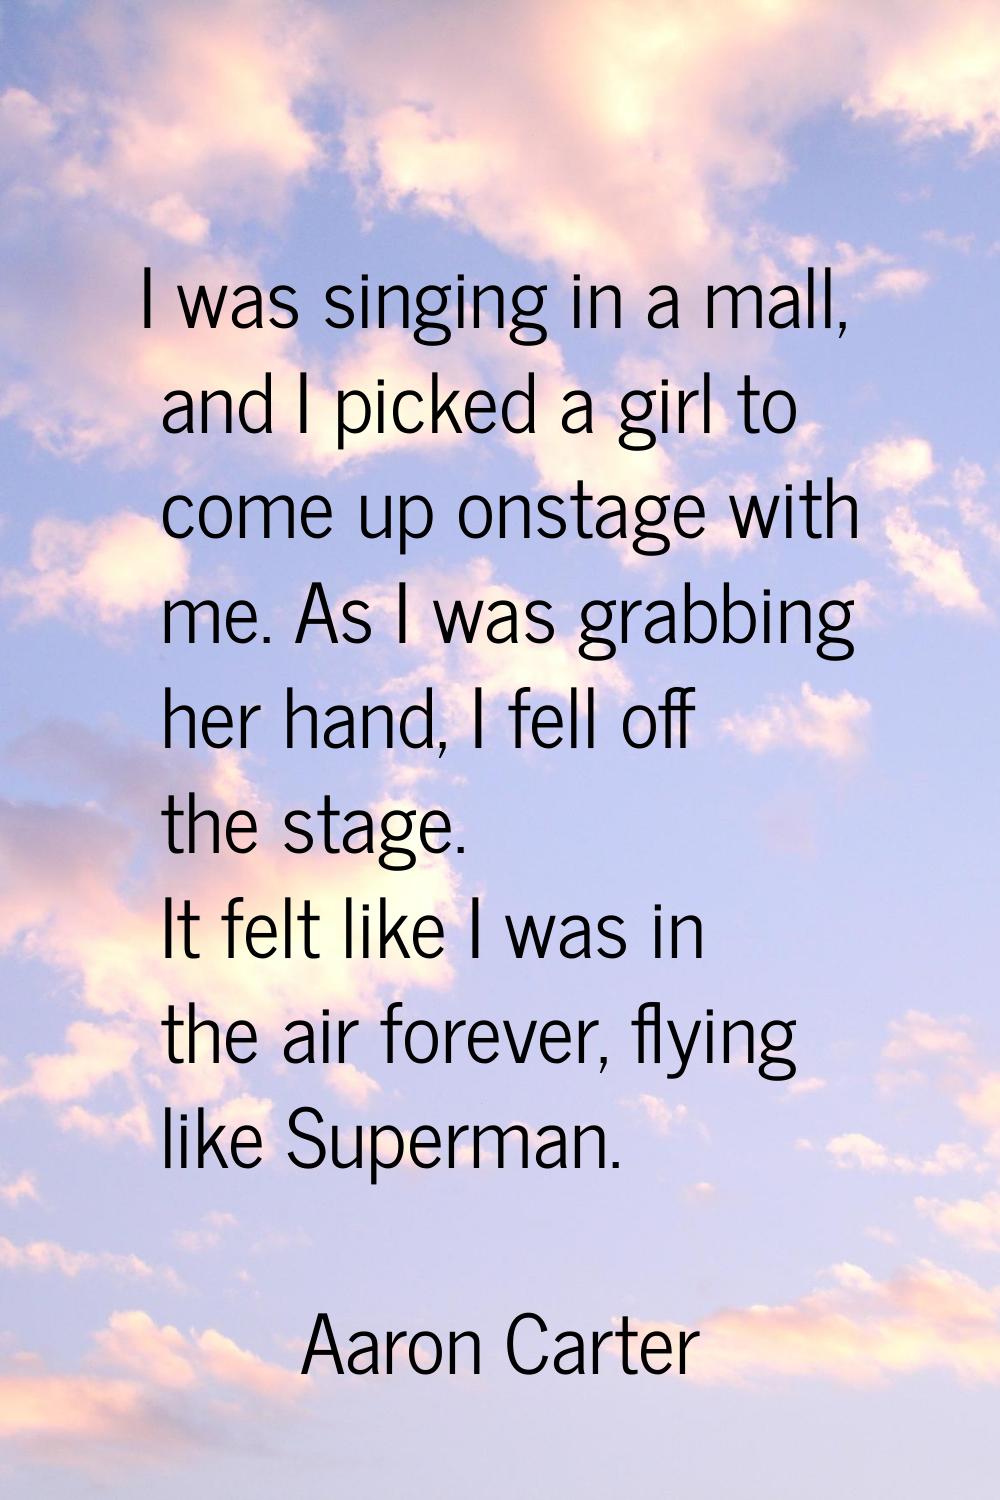 I was singing in a mall, and I picked a girl to come up onstage with me. As I was grabbing her hand